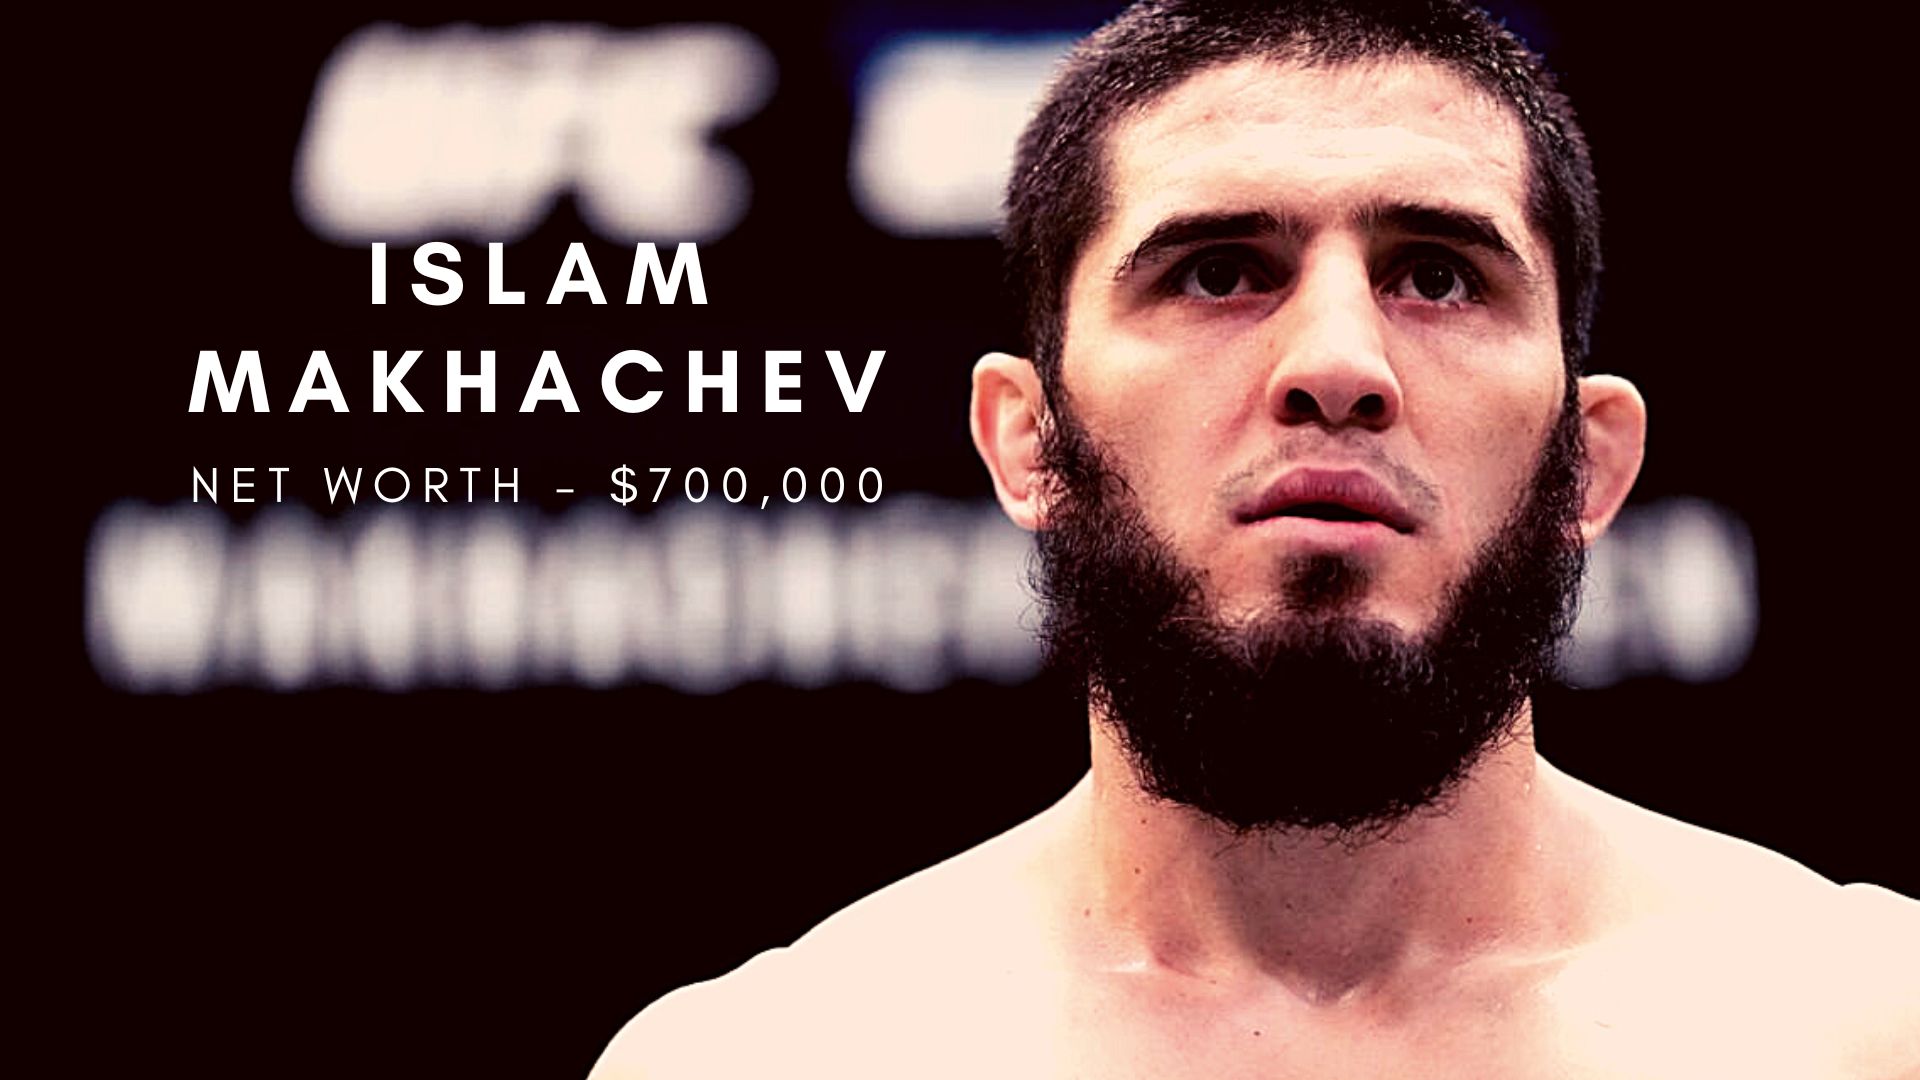 Islam Makhachev 2022 Net Worth, Salary, Records, and Endorsements